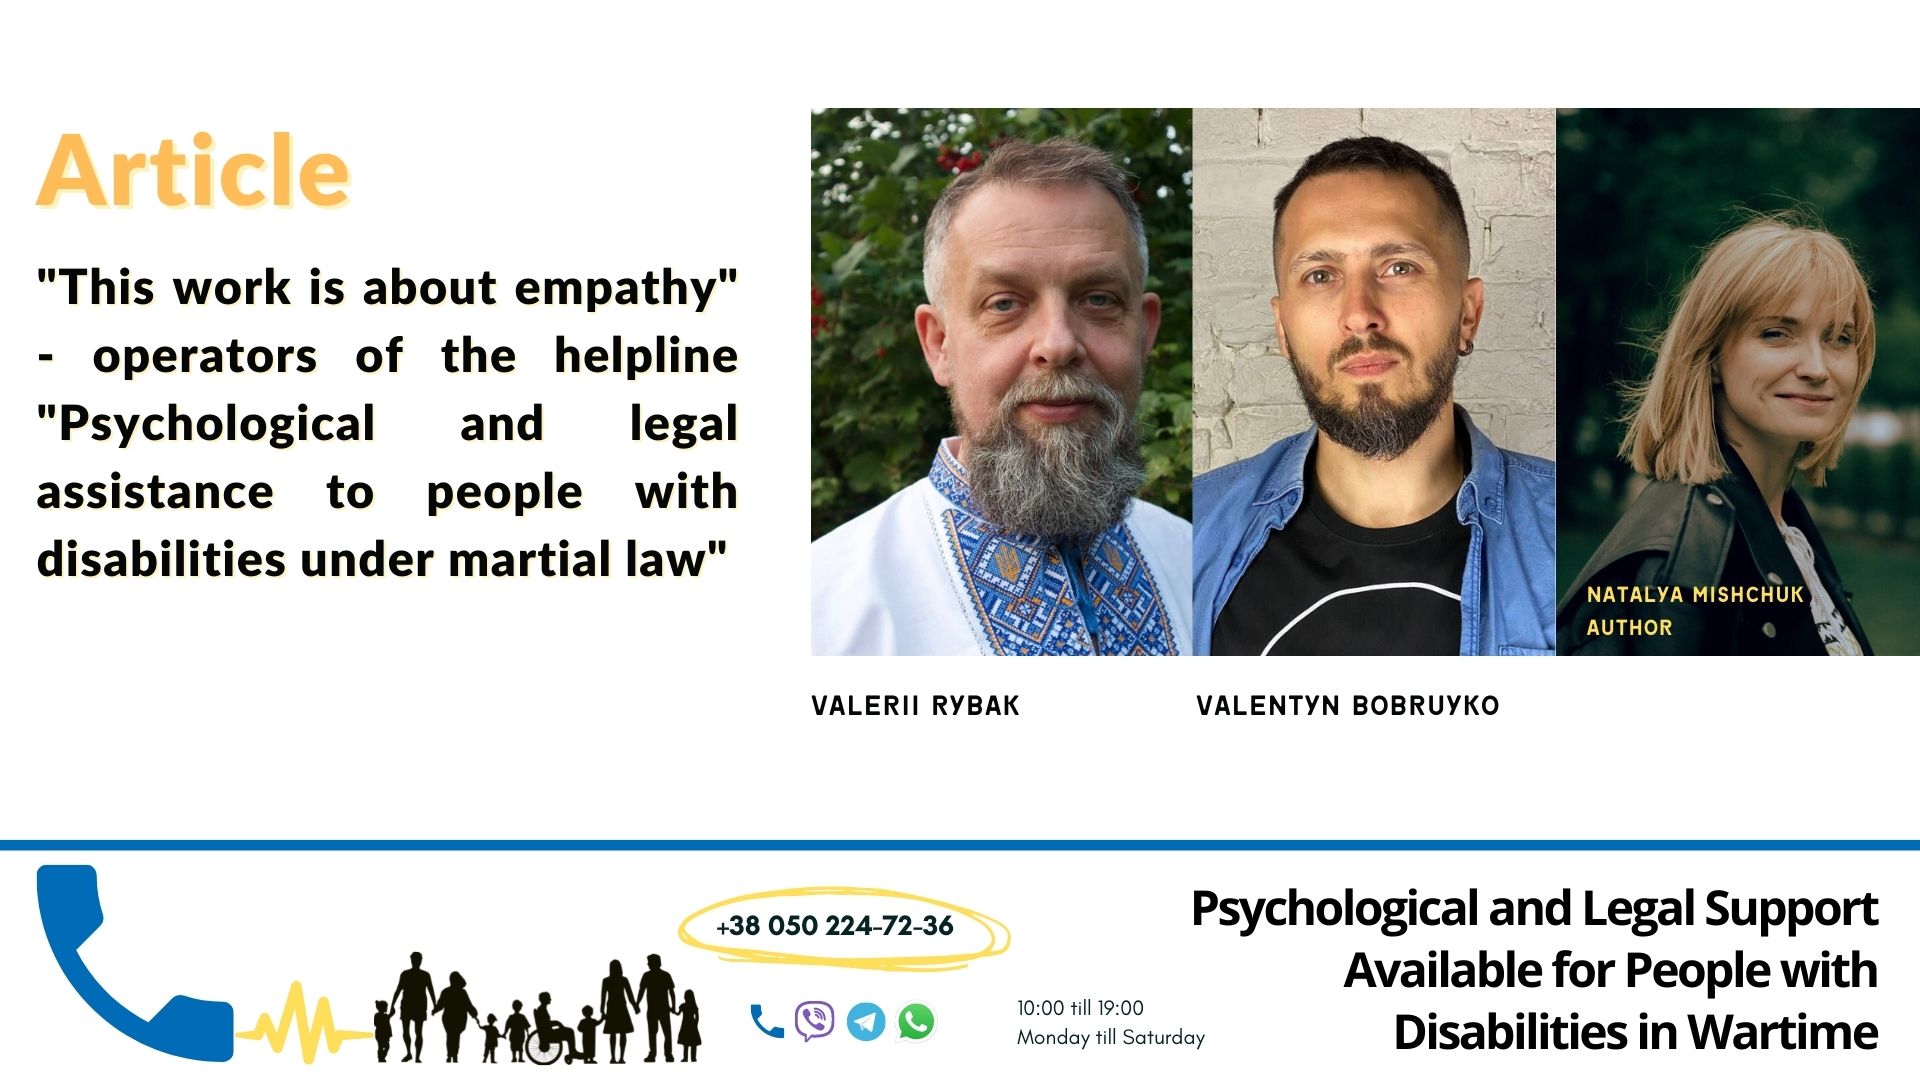 "This work is about empathy" - the operators of the helpline Psychological and Legal Support Available for People with Disabilities in Wartime